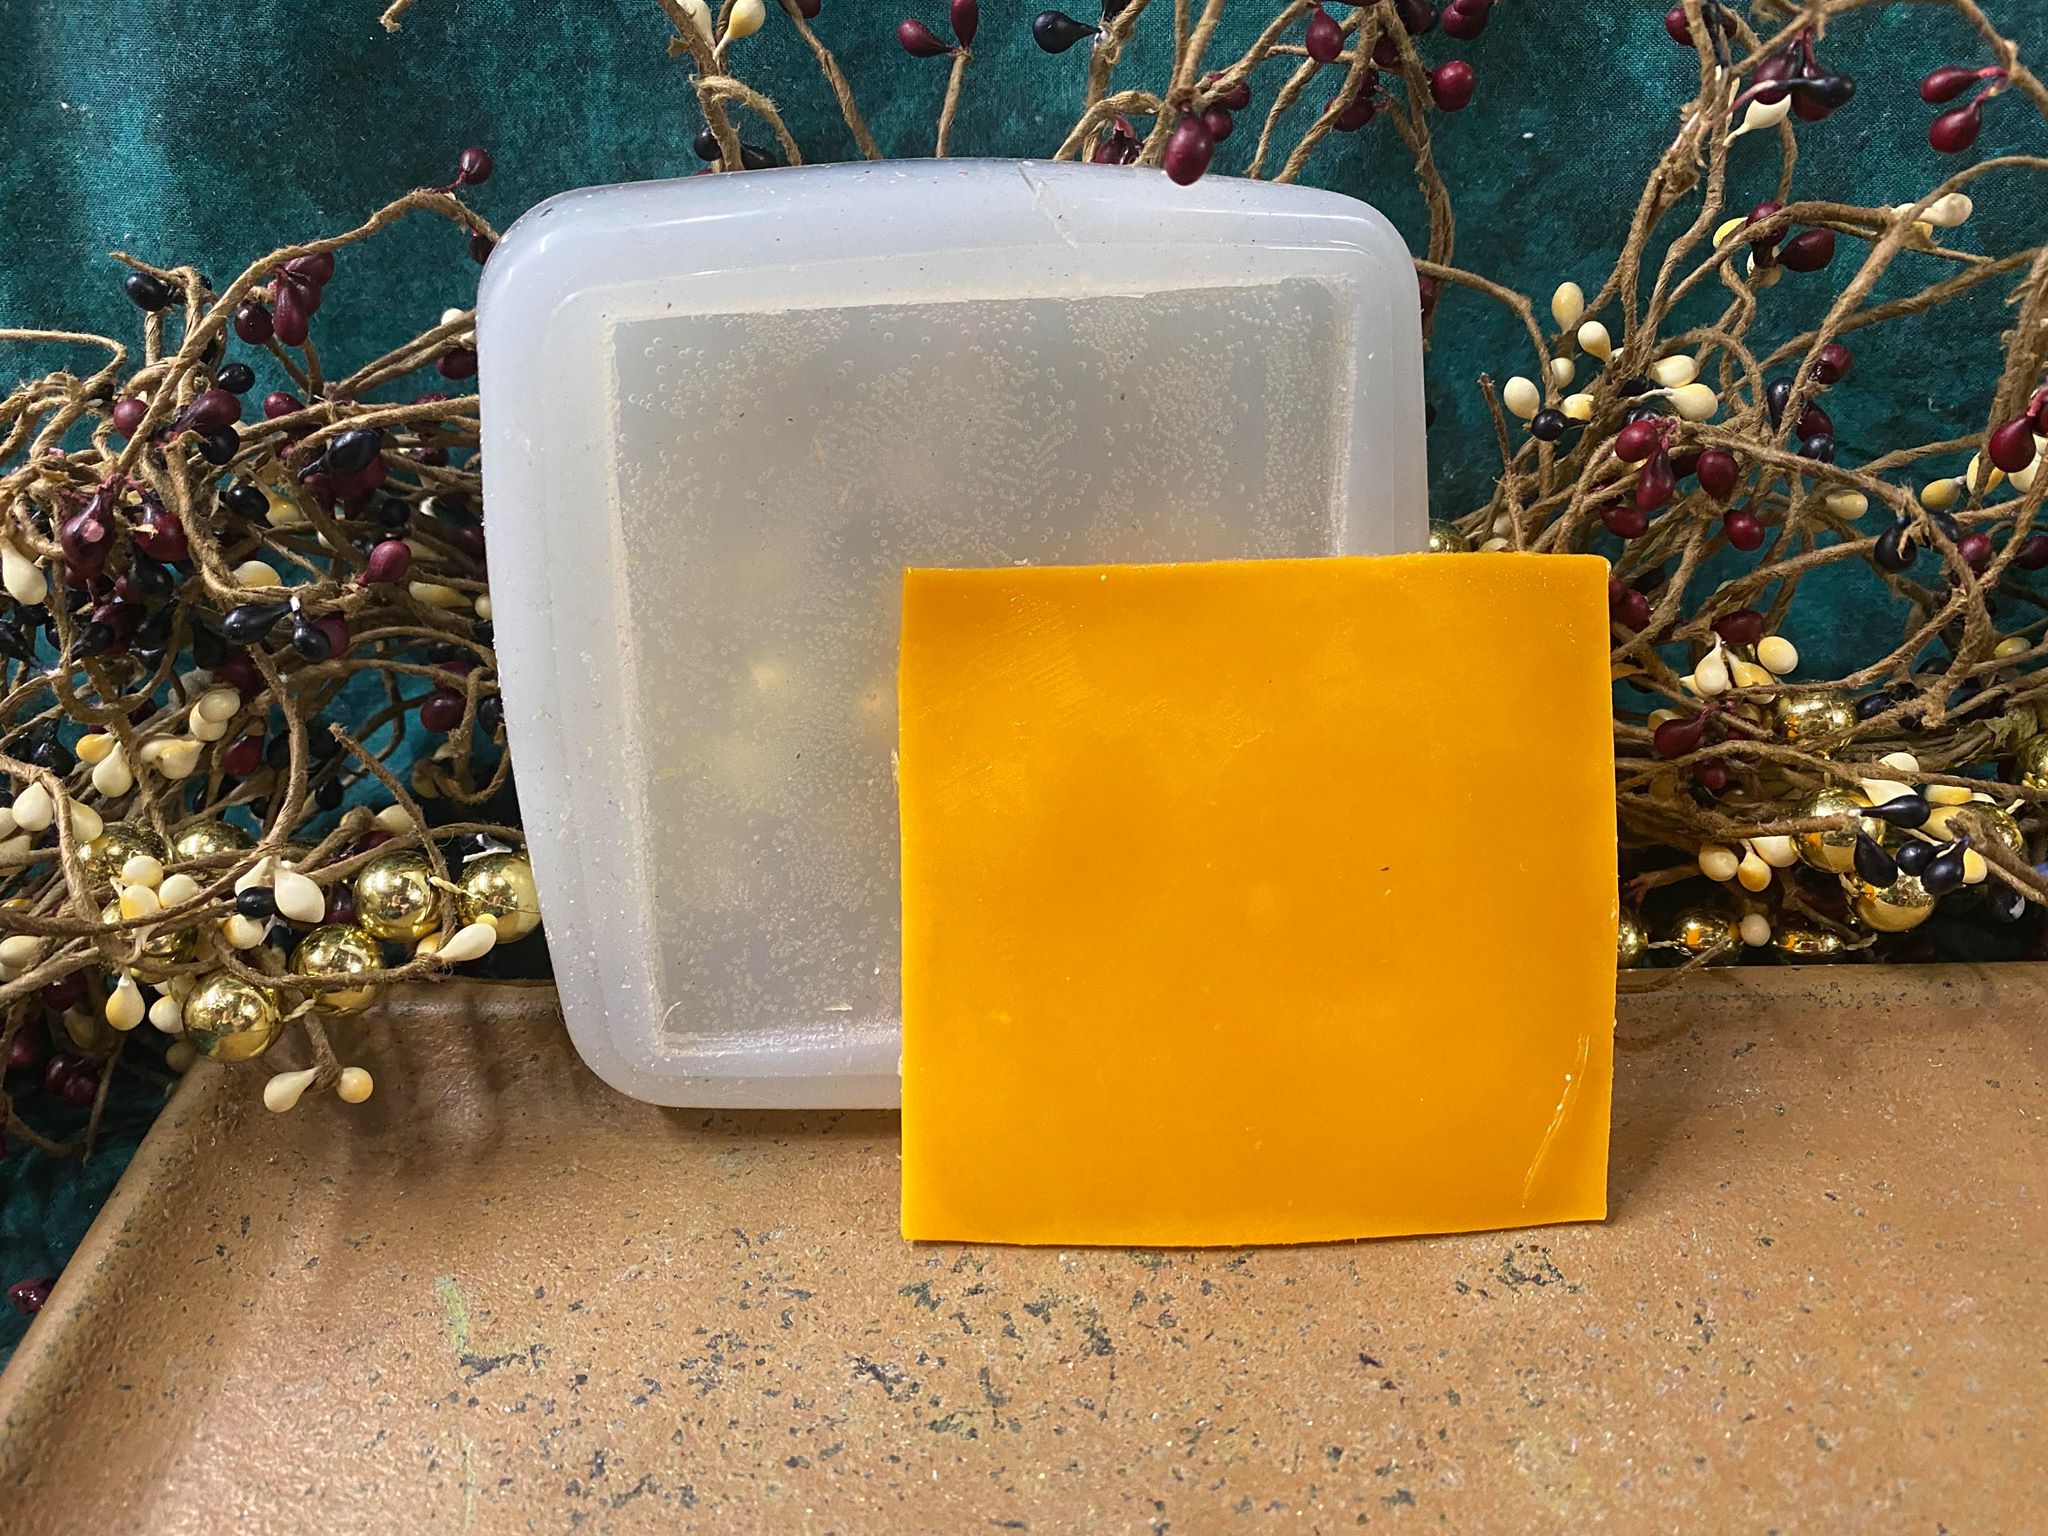 Gold Bar cake silicone mould handmade